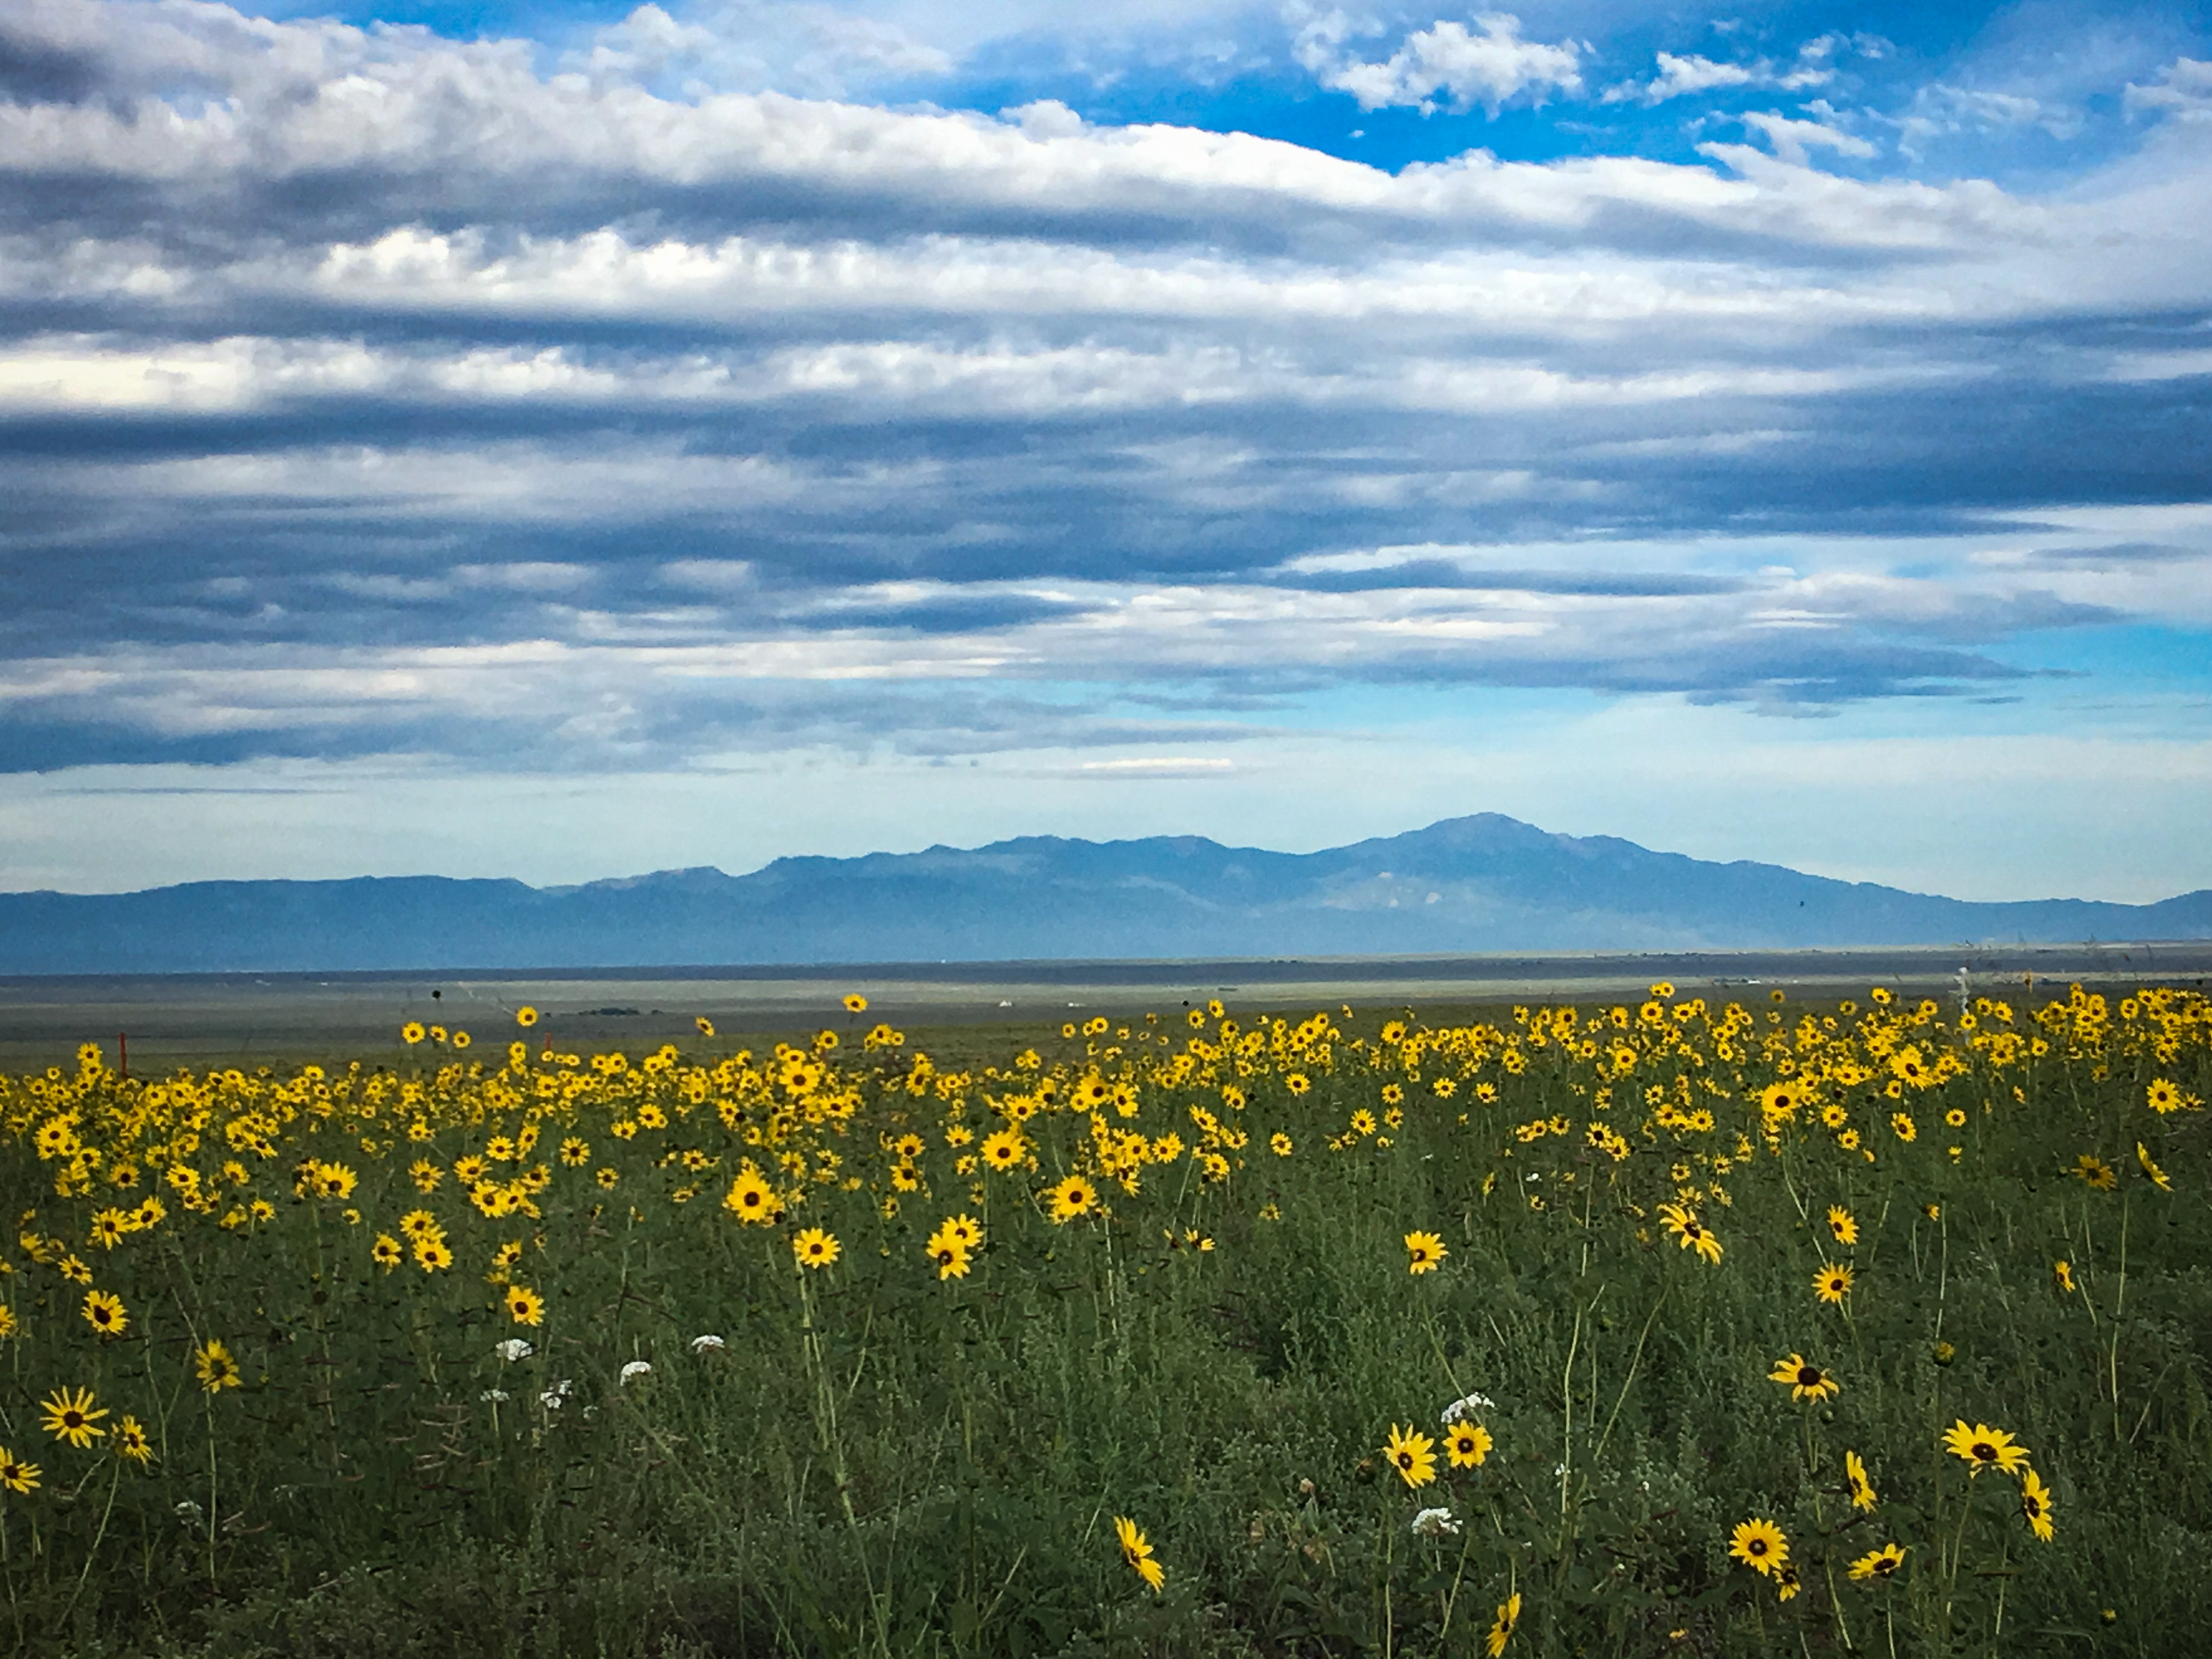 Yellow flowers grow from the grass with blue mountains in the background.